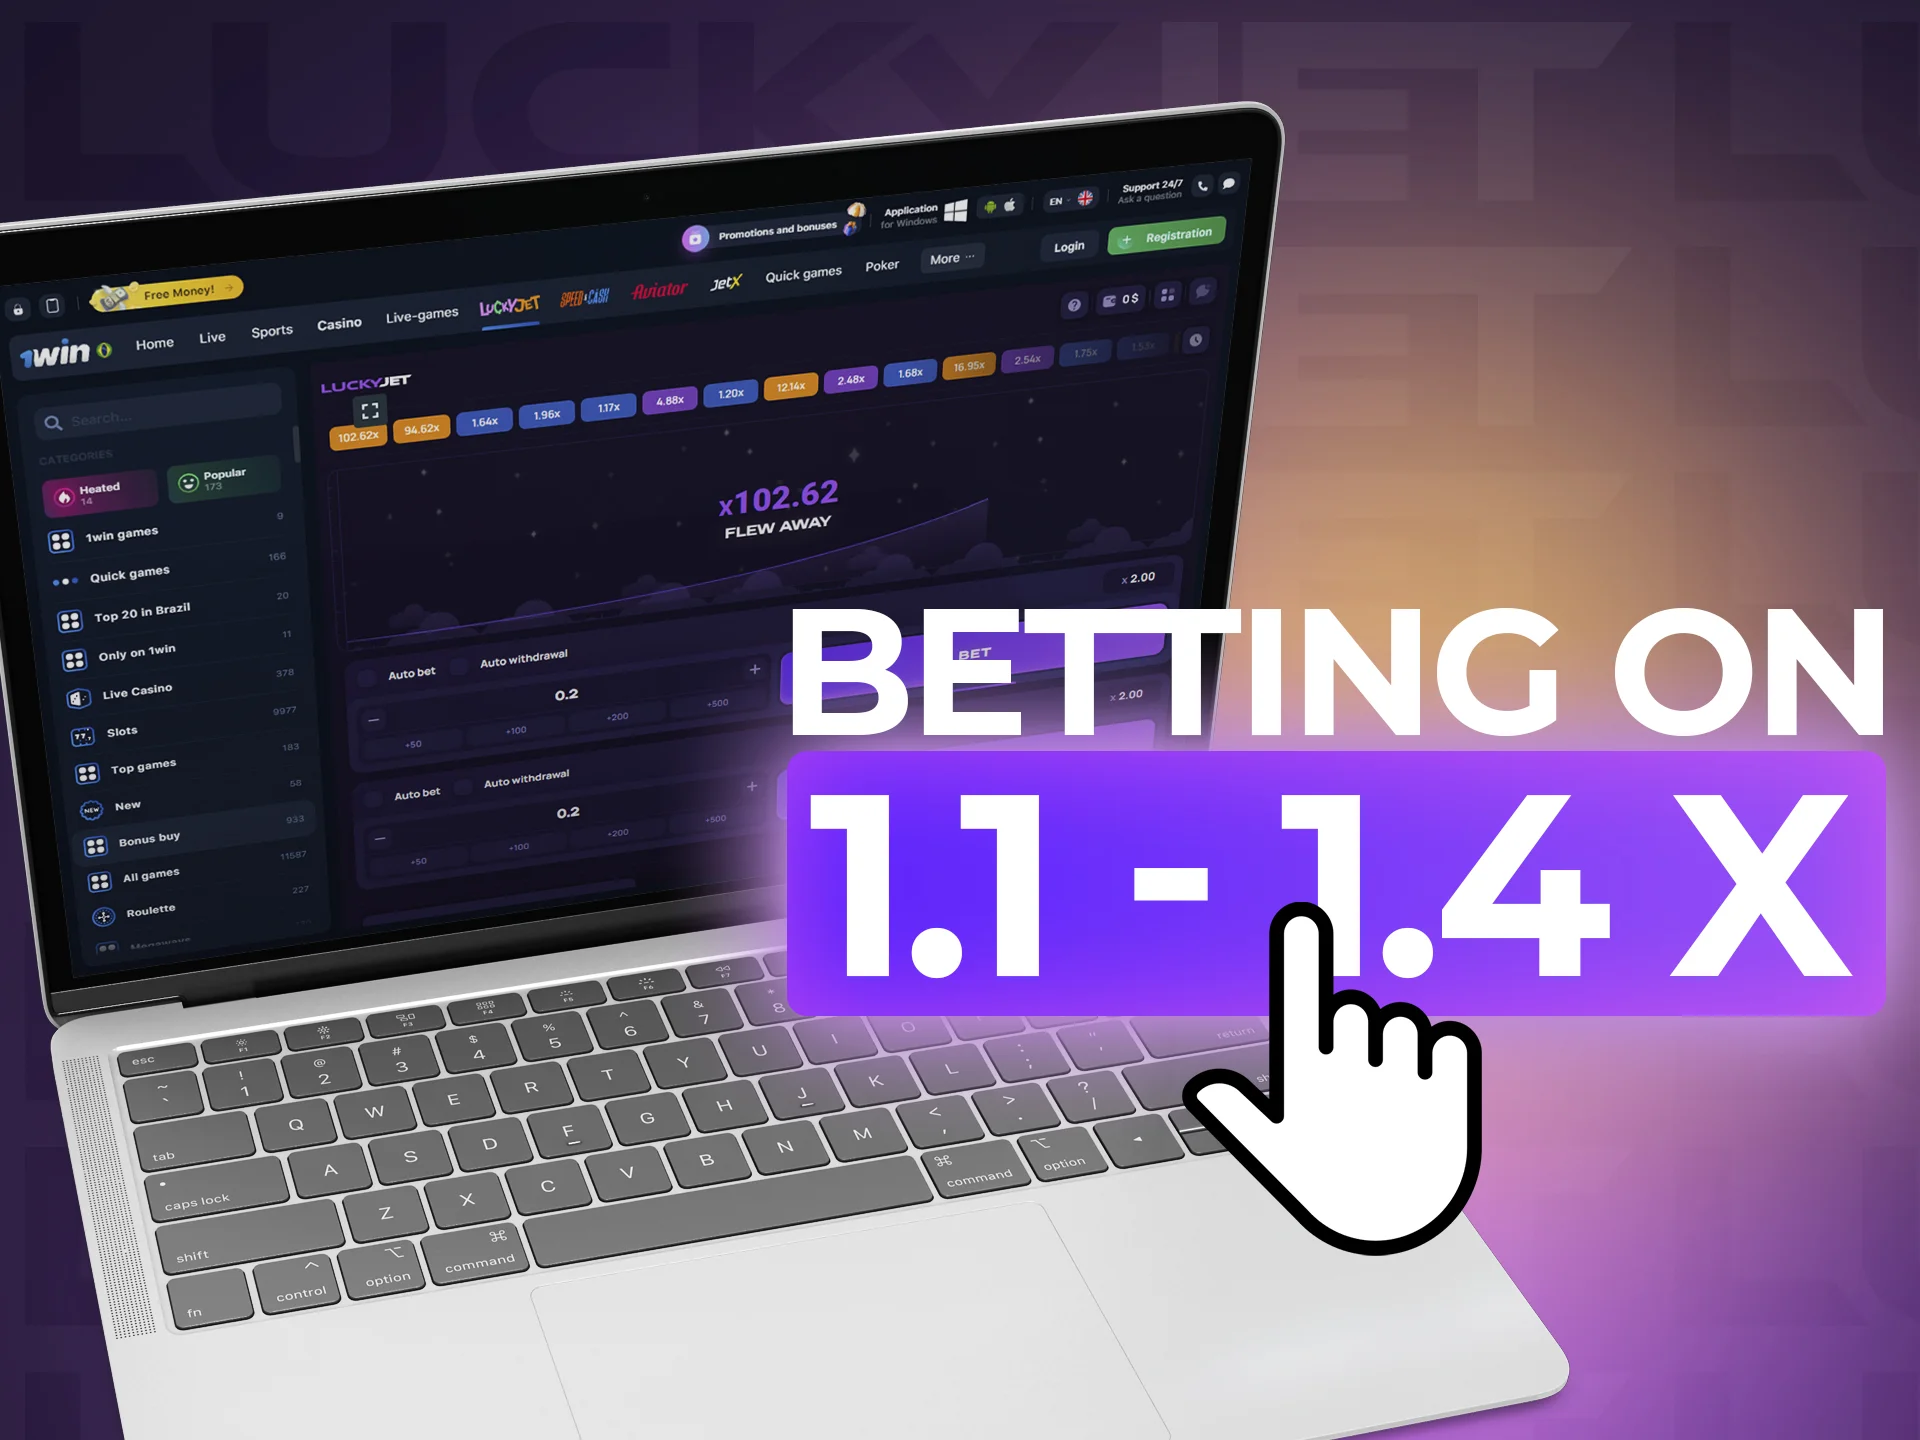 Bet at odds of 1.1-1.4.